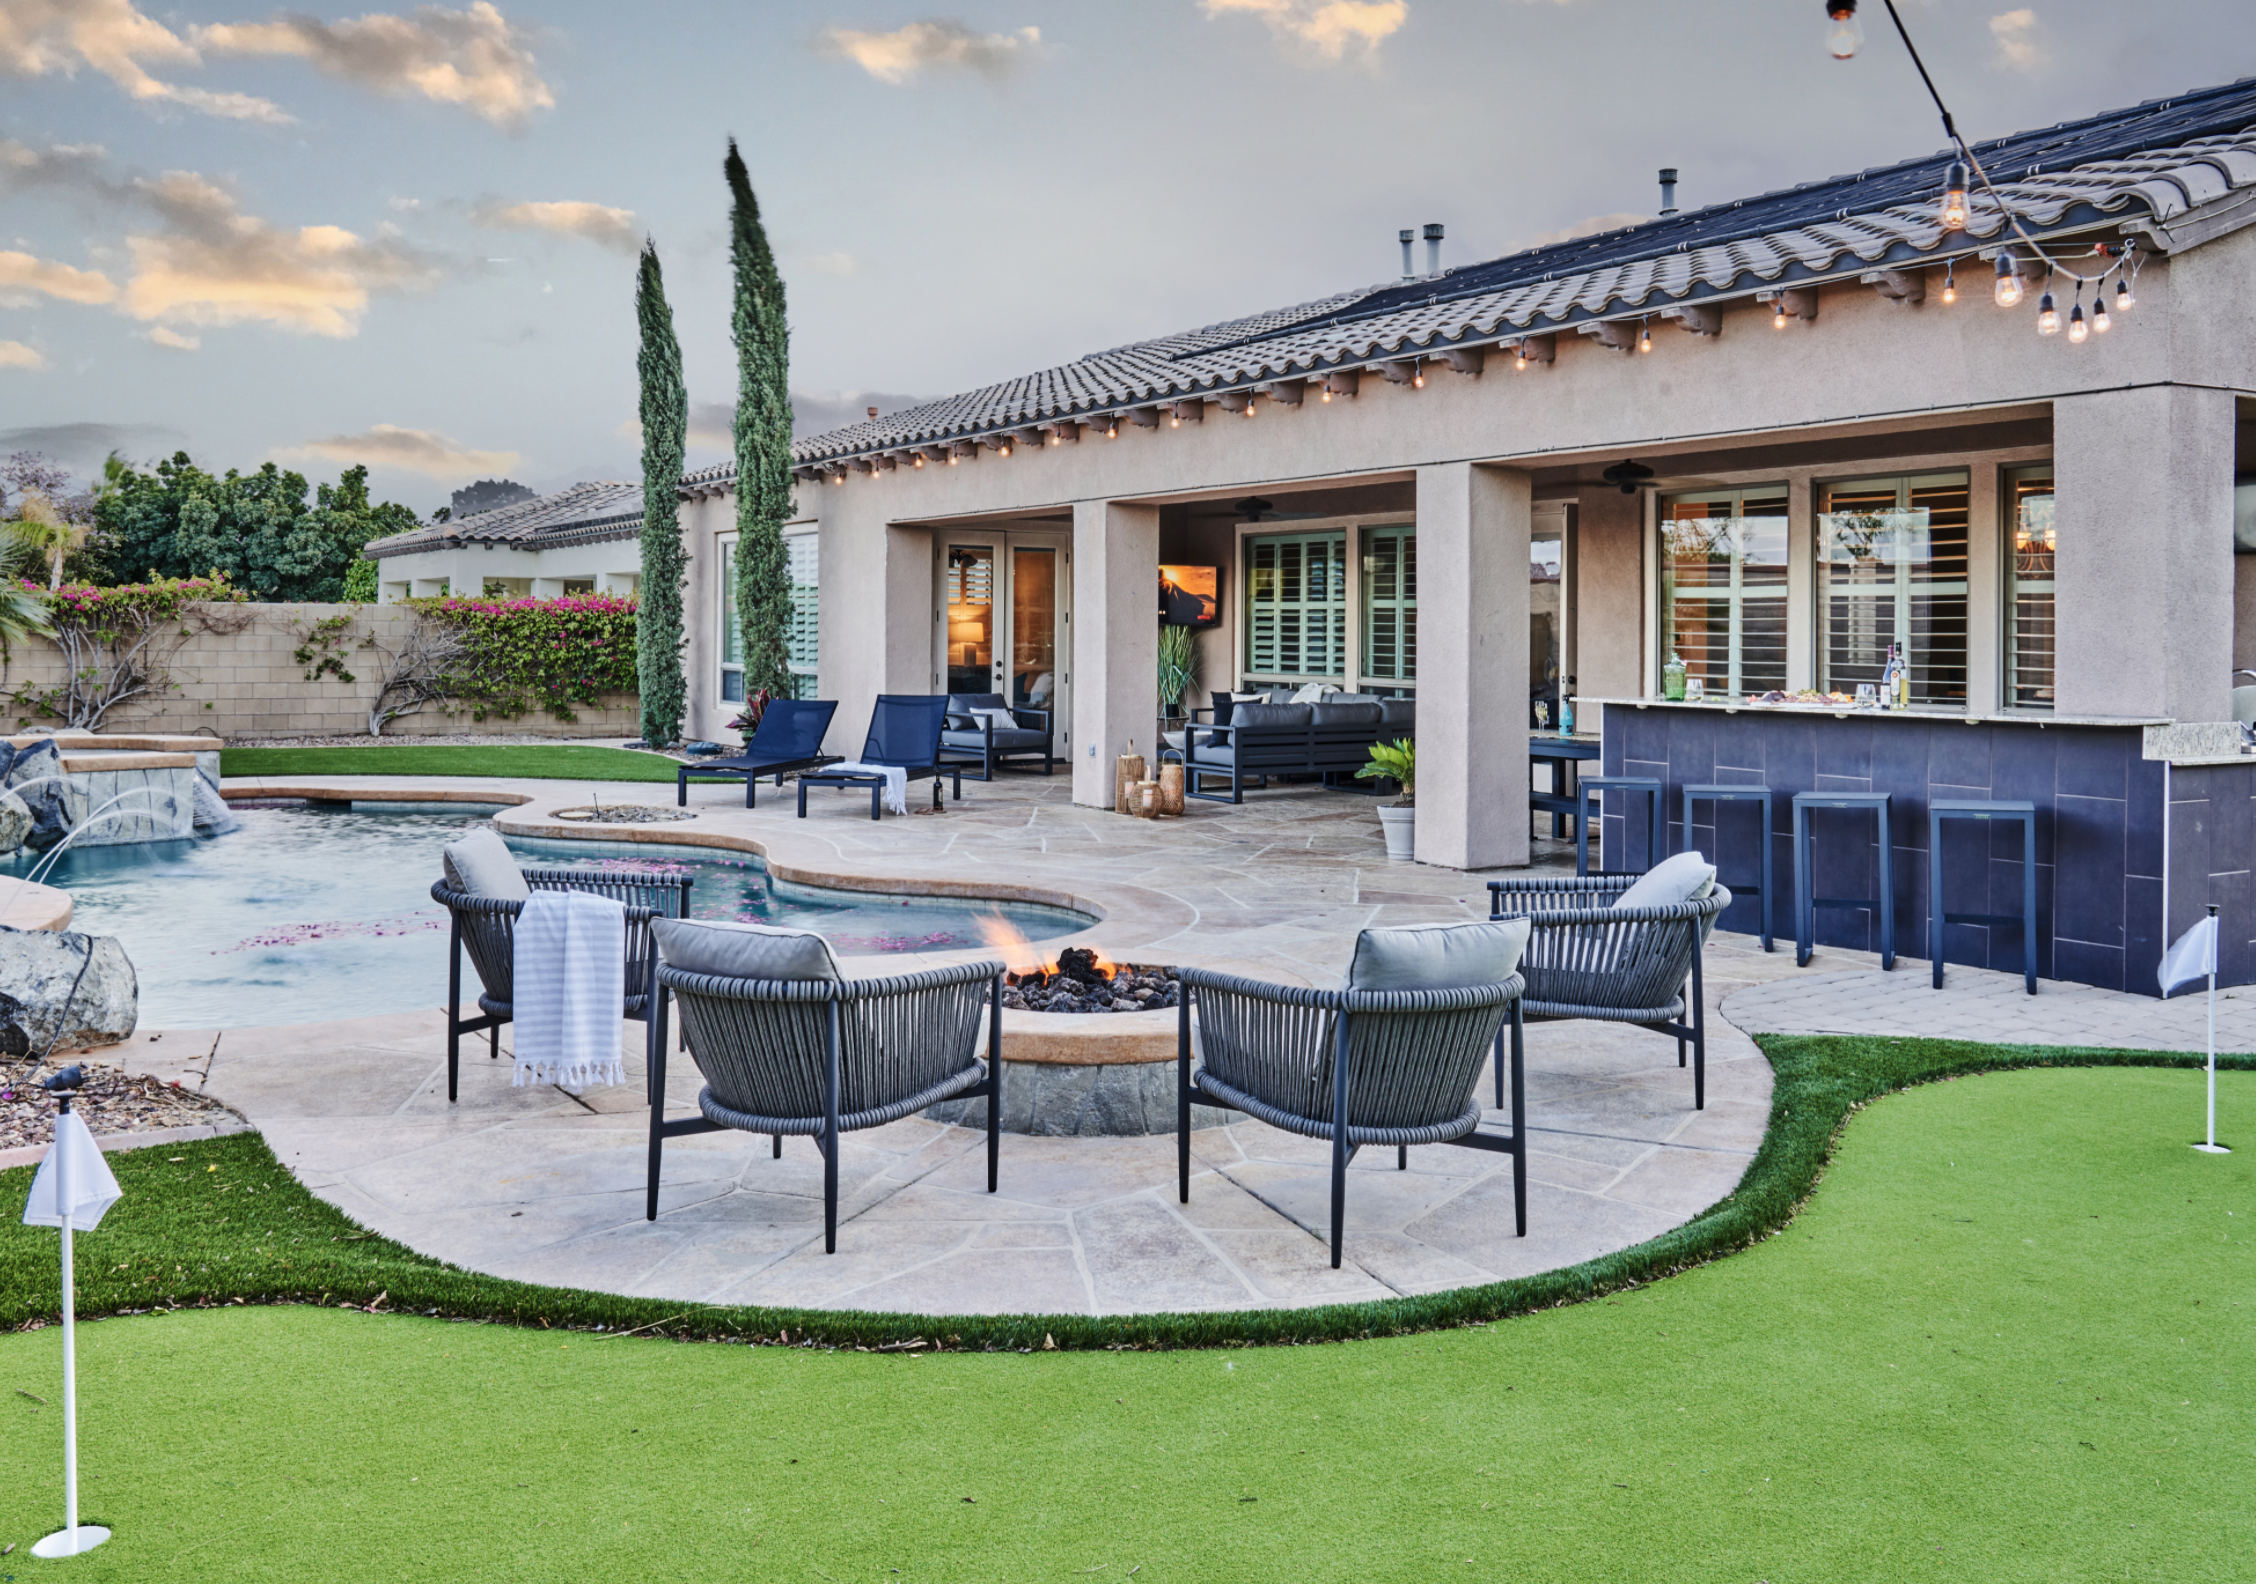 Country club-like backyard with fire pit area